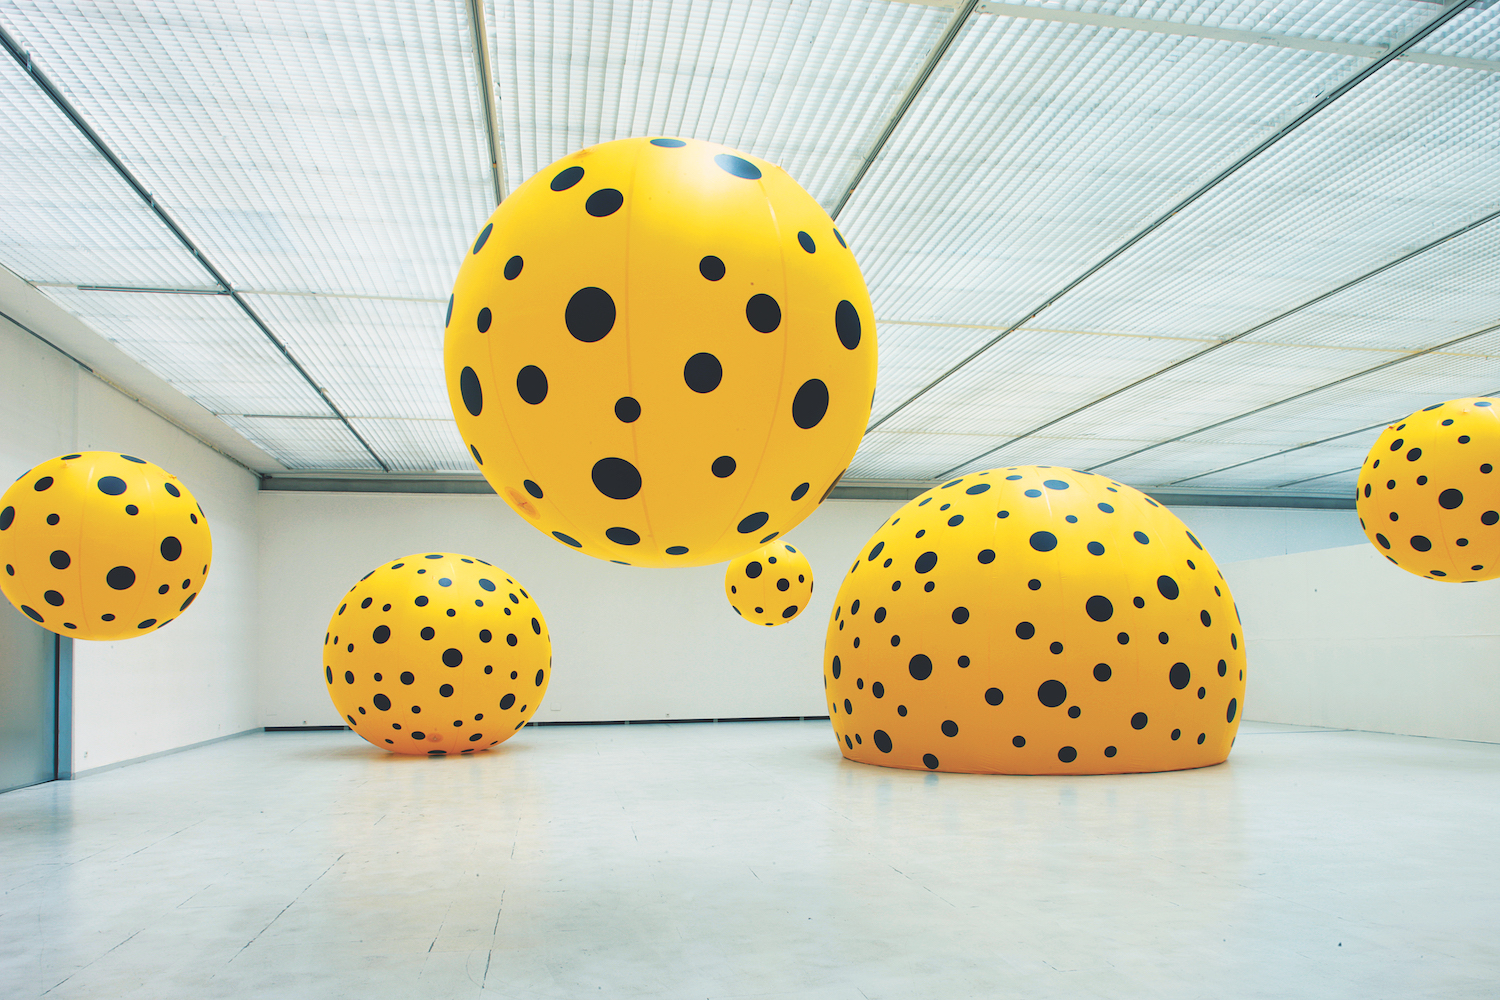 Yayoi Kusama: The Spirits Of The Pumpkins Descended Into The